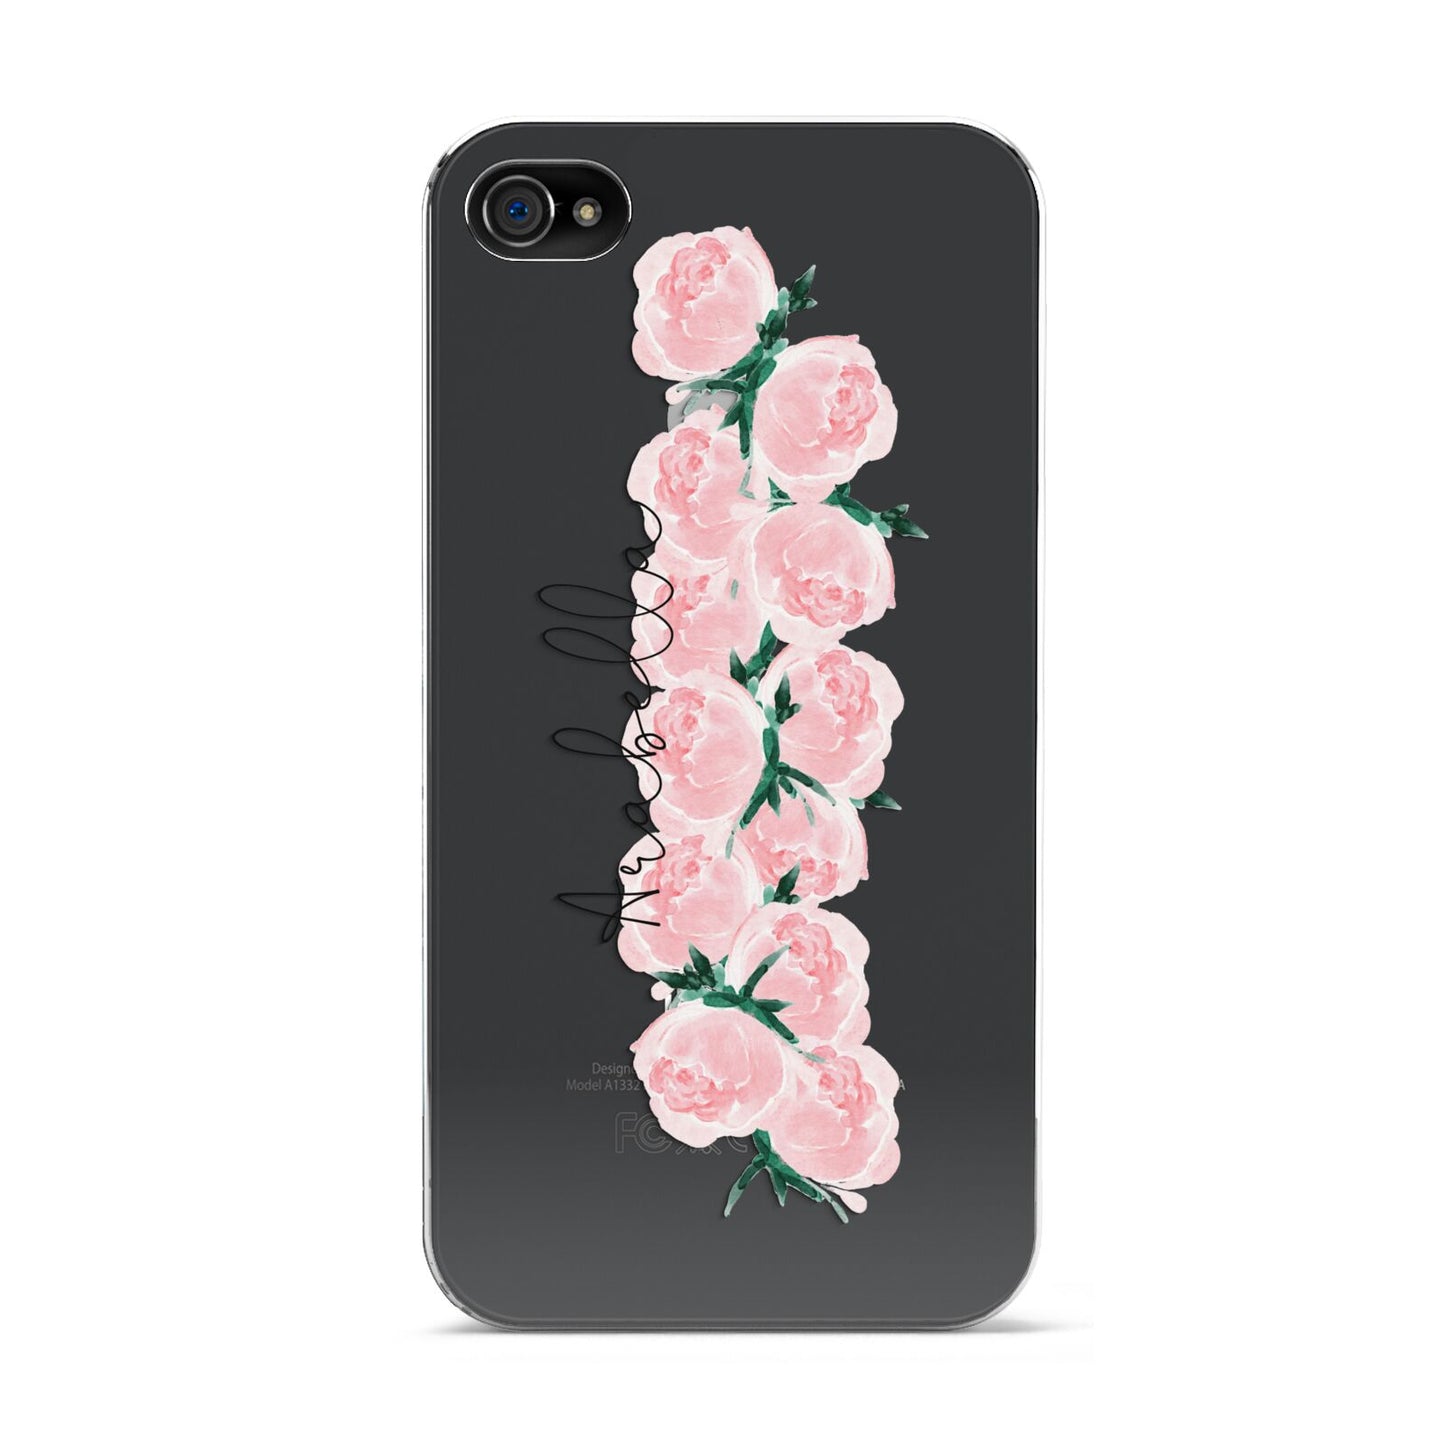 Personalised Name Pink Roses Apple iPhone 4s Case